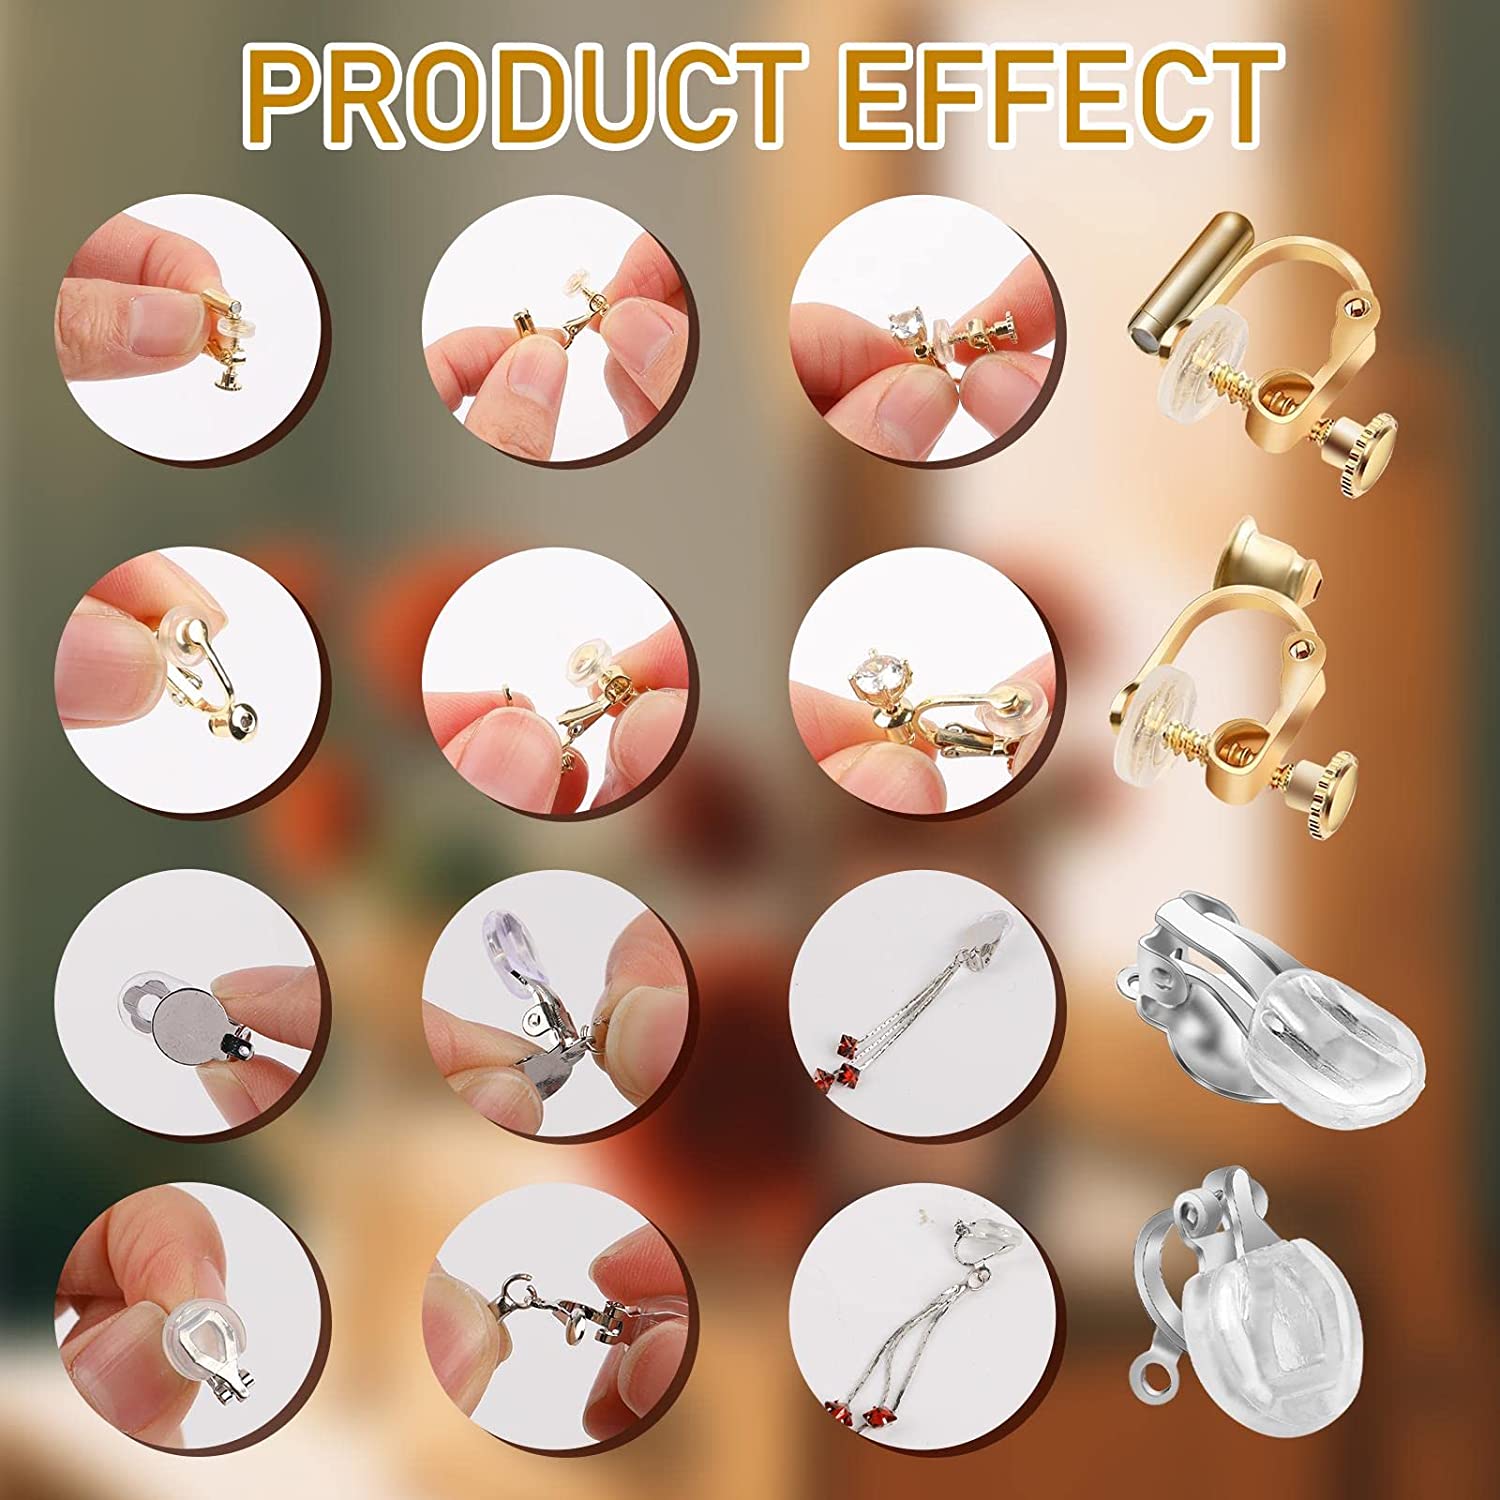 16 Pcs Clip on Earring Converter with Silicon Earring Pads, Gold Silver Round Flat Back Tray Earring Clip, and Converter Components with Post for DIY Earring Making for Women Men None Pierced Ears - image 2 of 5